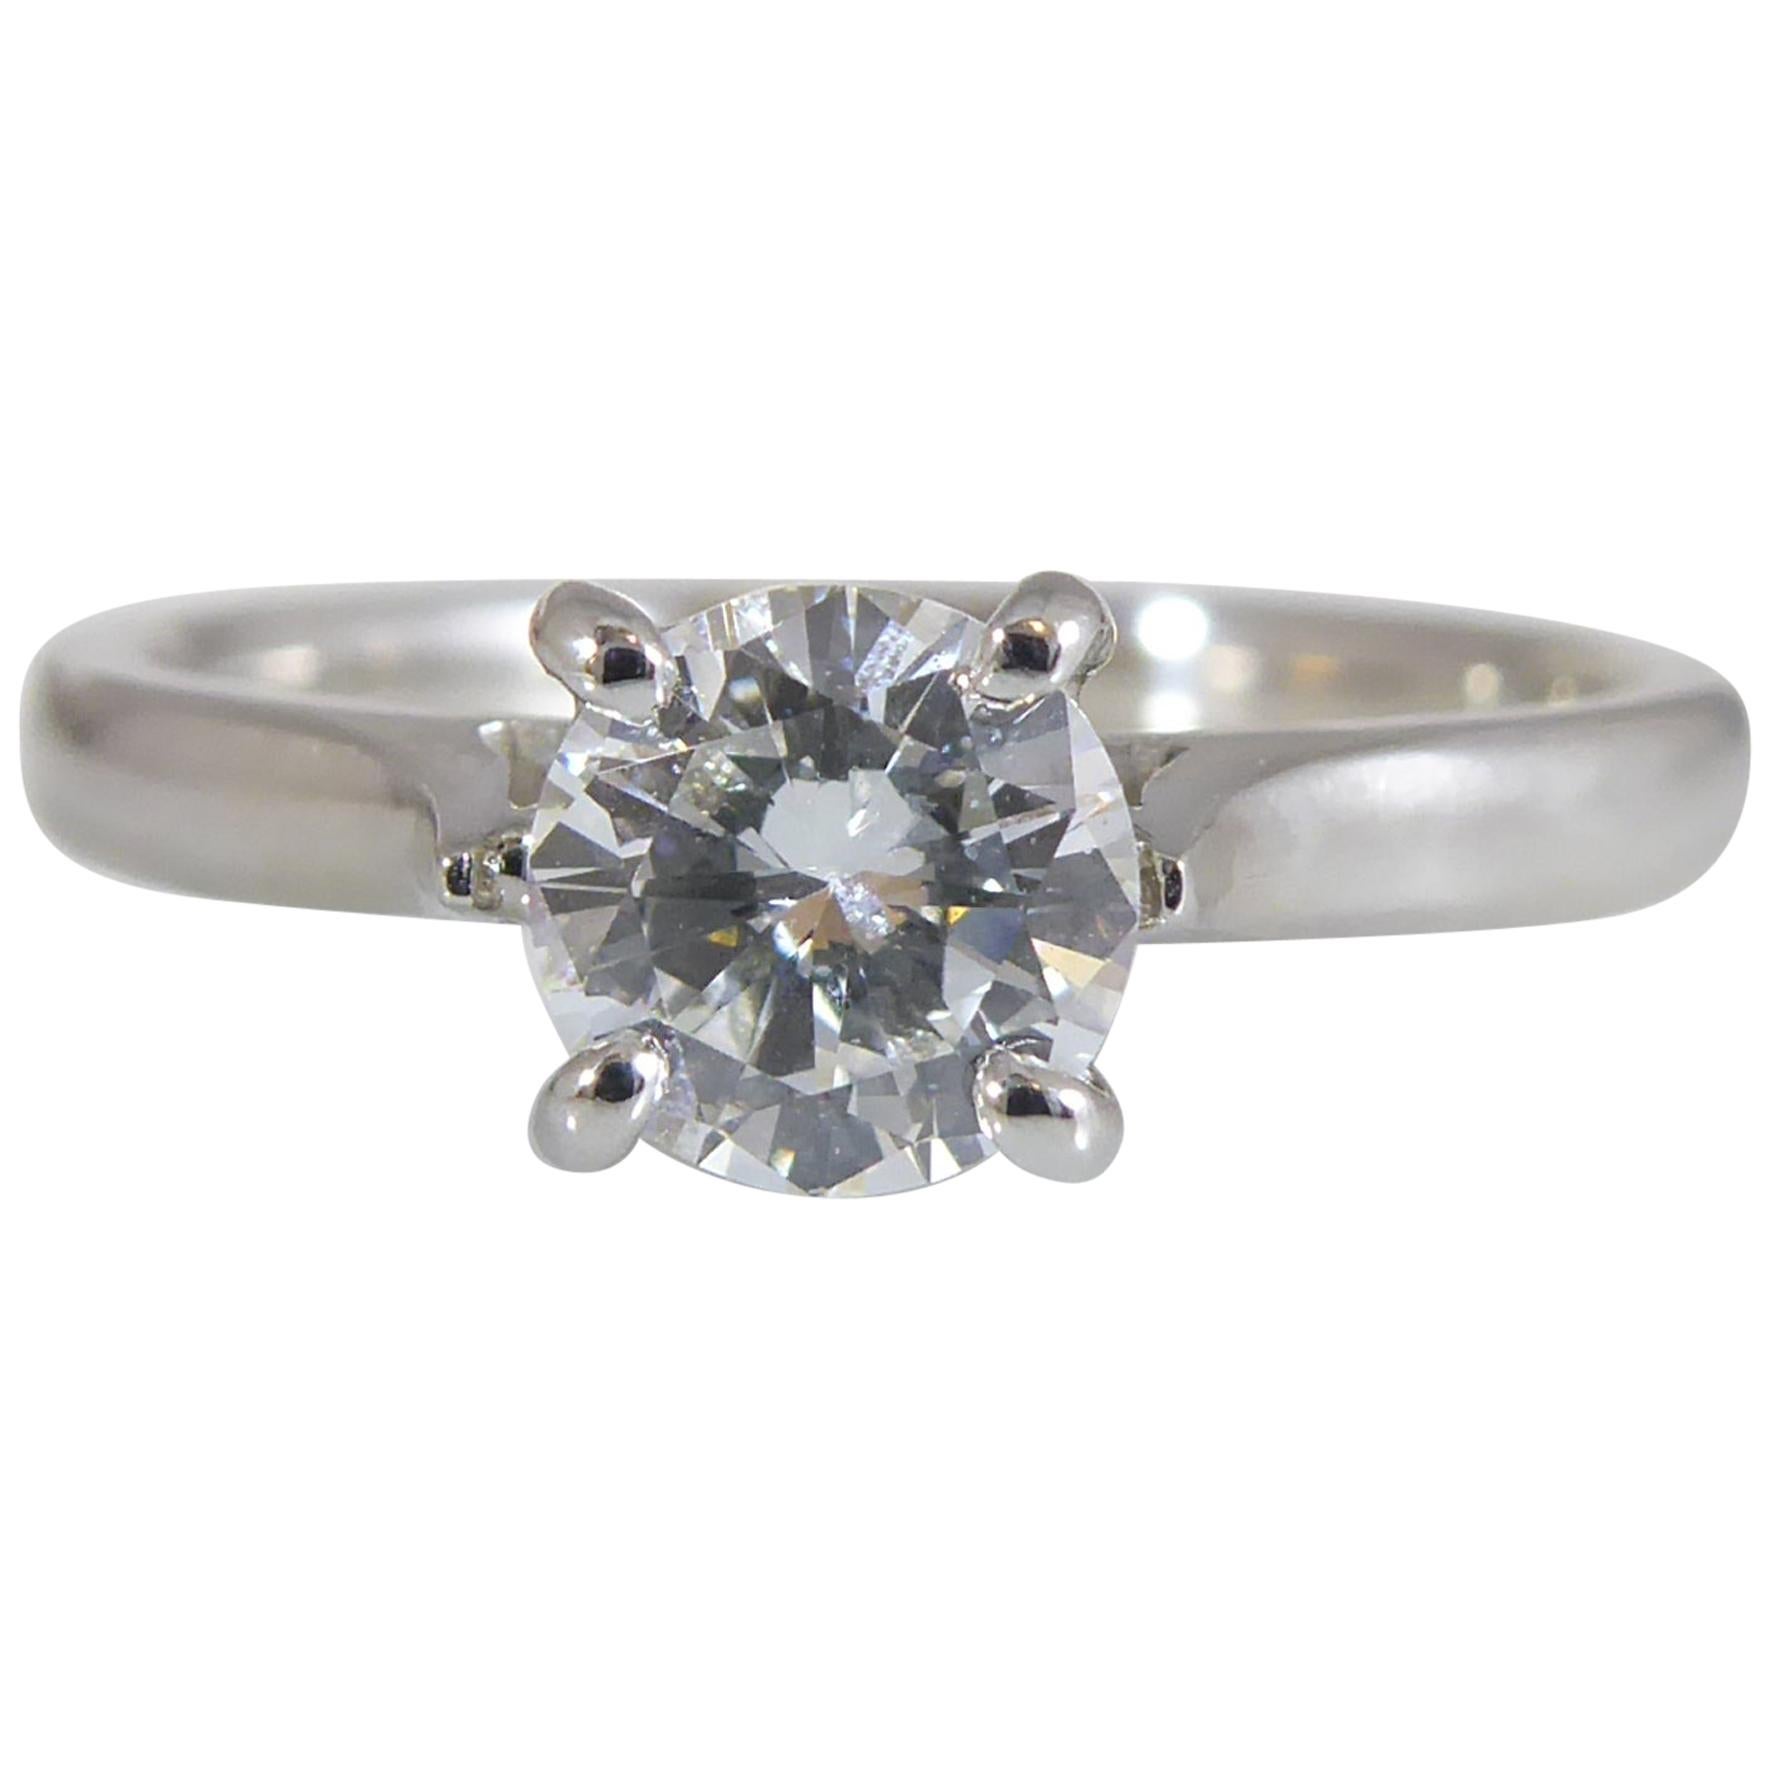 Pre-Owned Diamond Solitaire Ring, with 0.52 Carat Diamond, Platinum Band